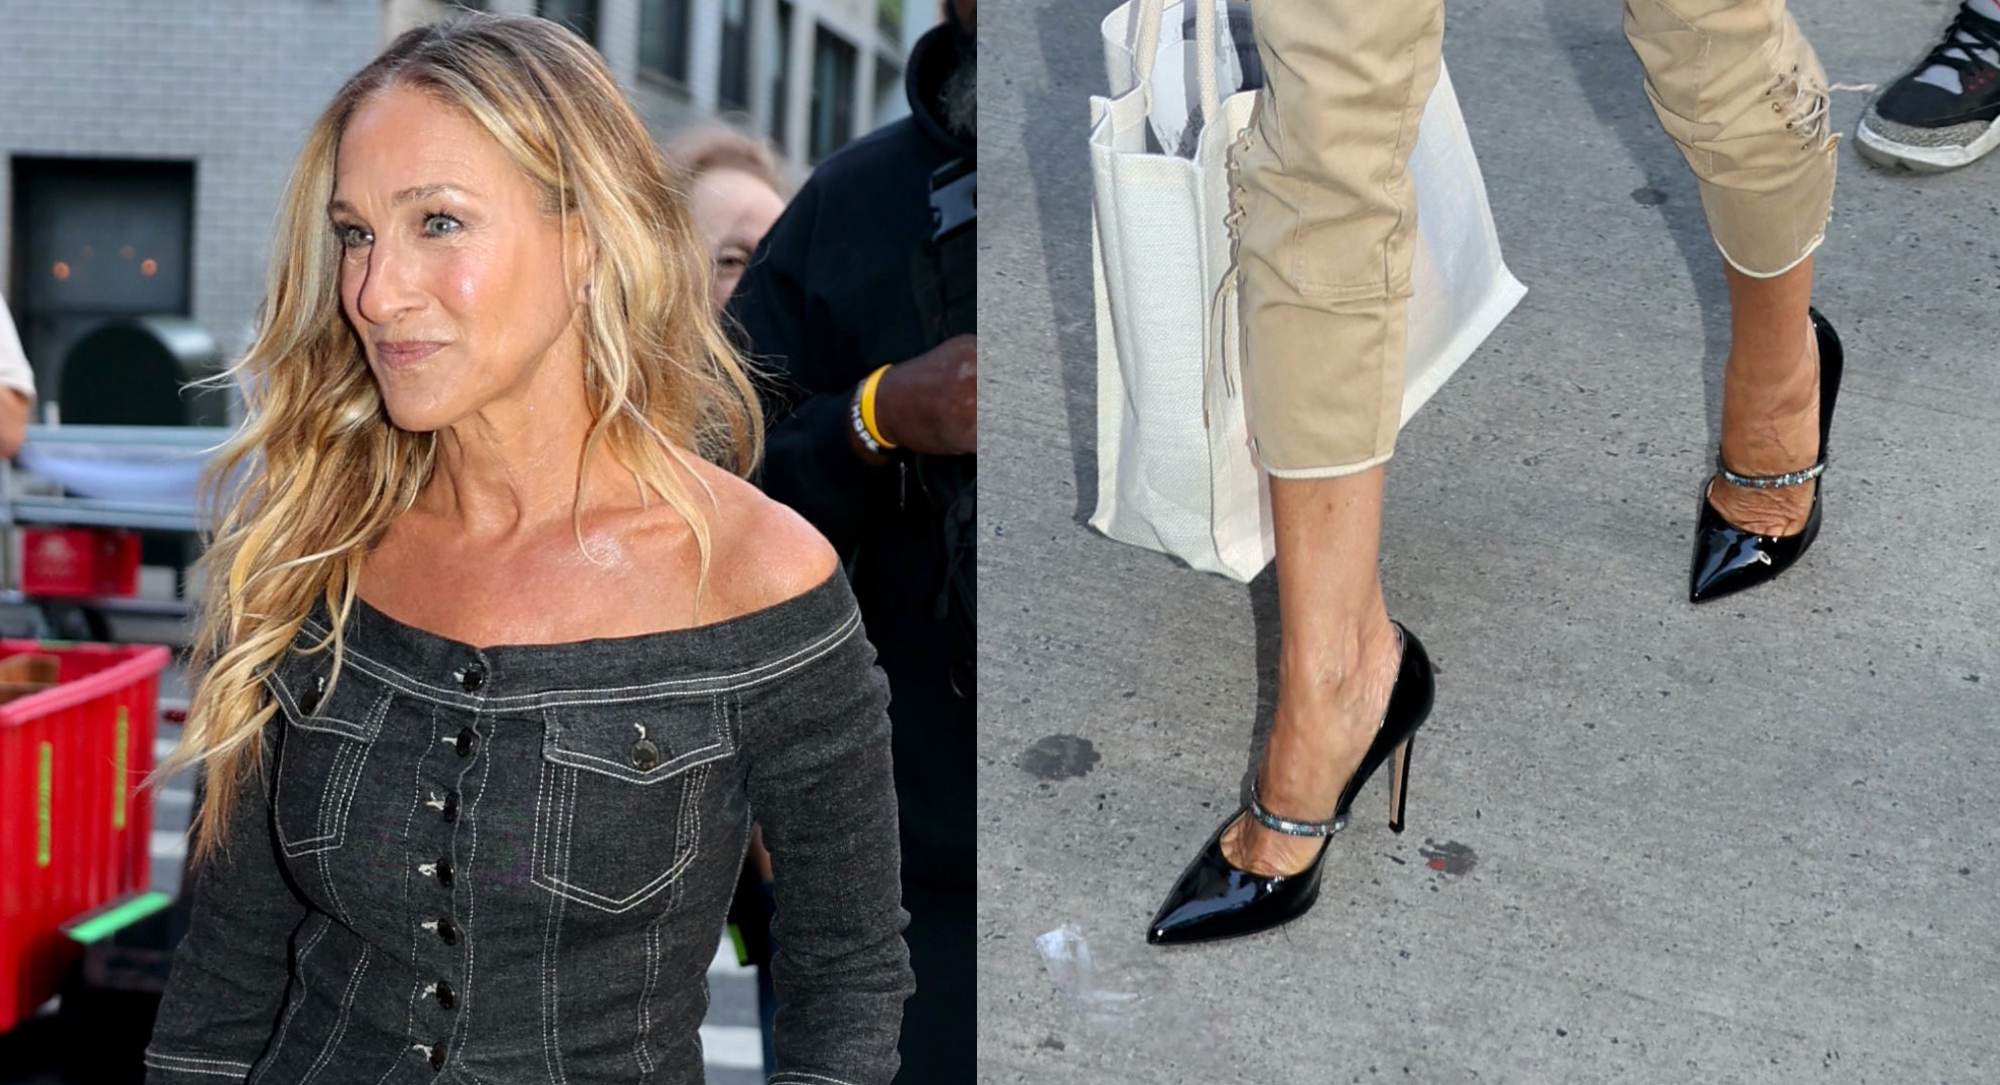 Sarah Jessica Parker Sports Updated Black Mary Jane Pumps While Filming ‘And Just Like That’ in New York